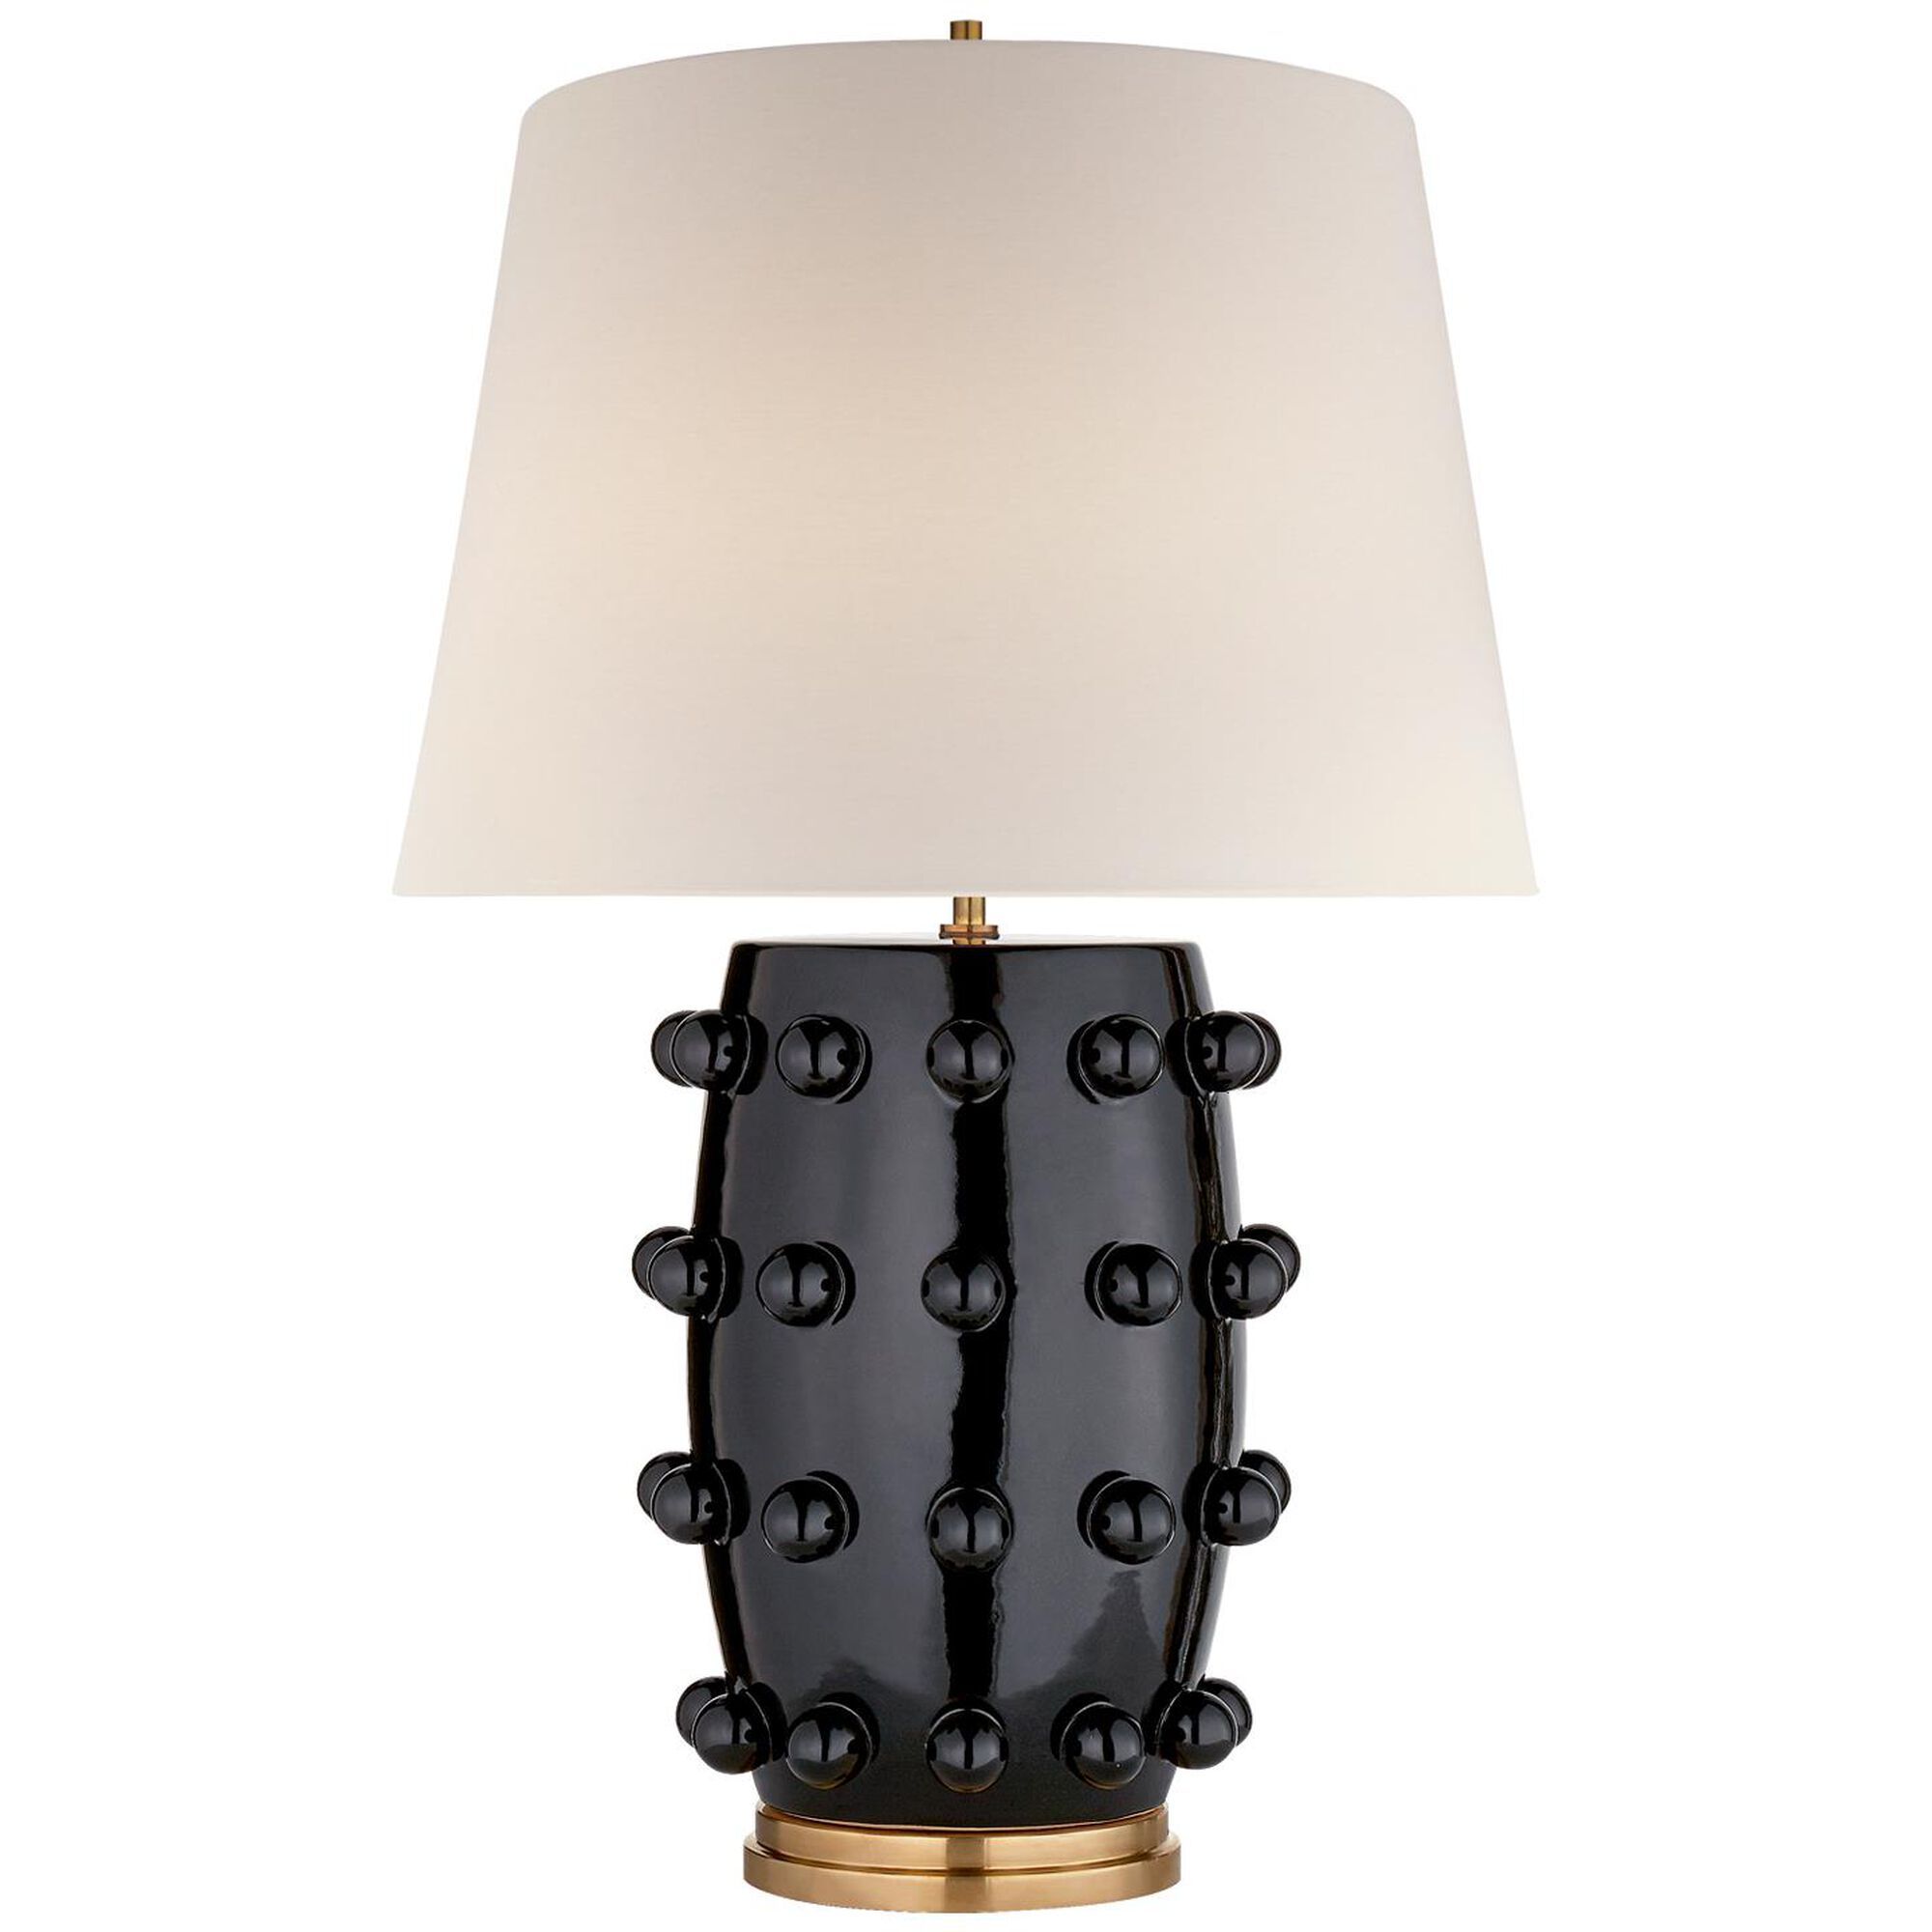 Kelly Wearstler Linden 26 Inch Table Lamp by Visual Comfort and Co. | Capitol Lighting 1800lighting.com